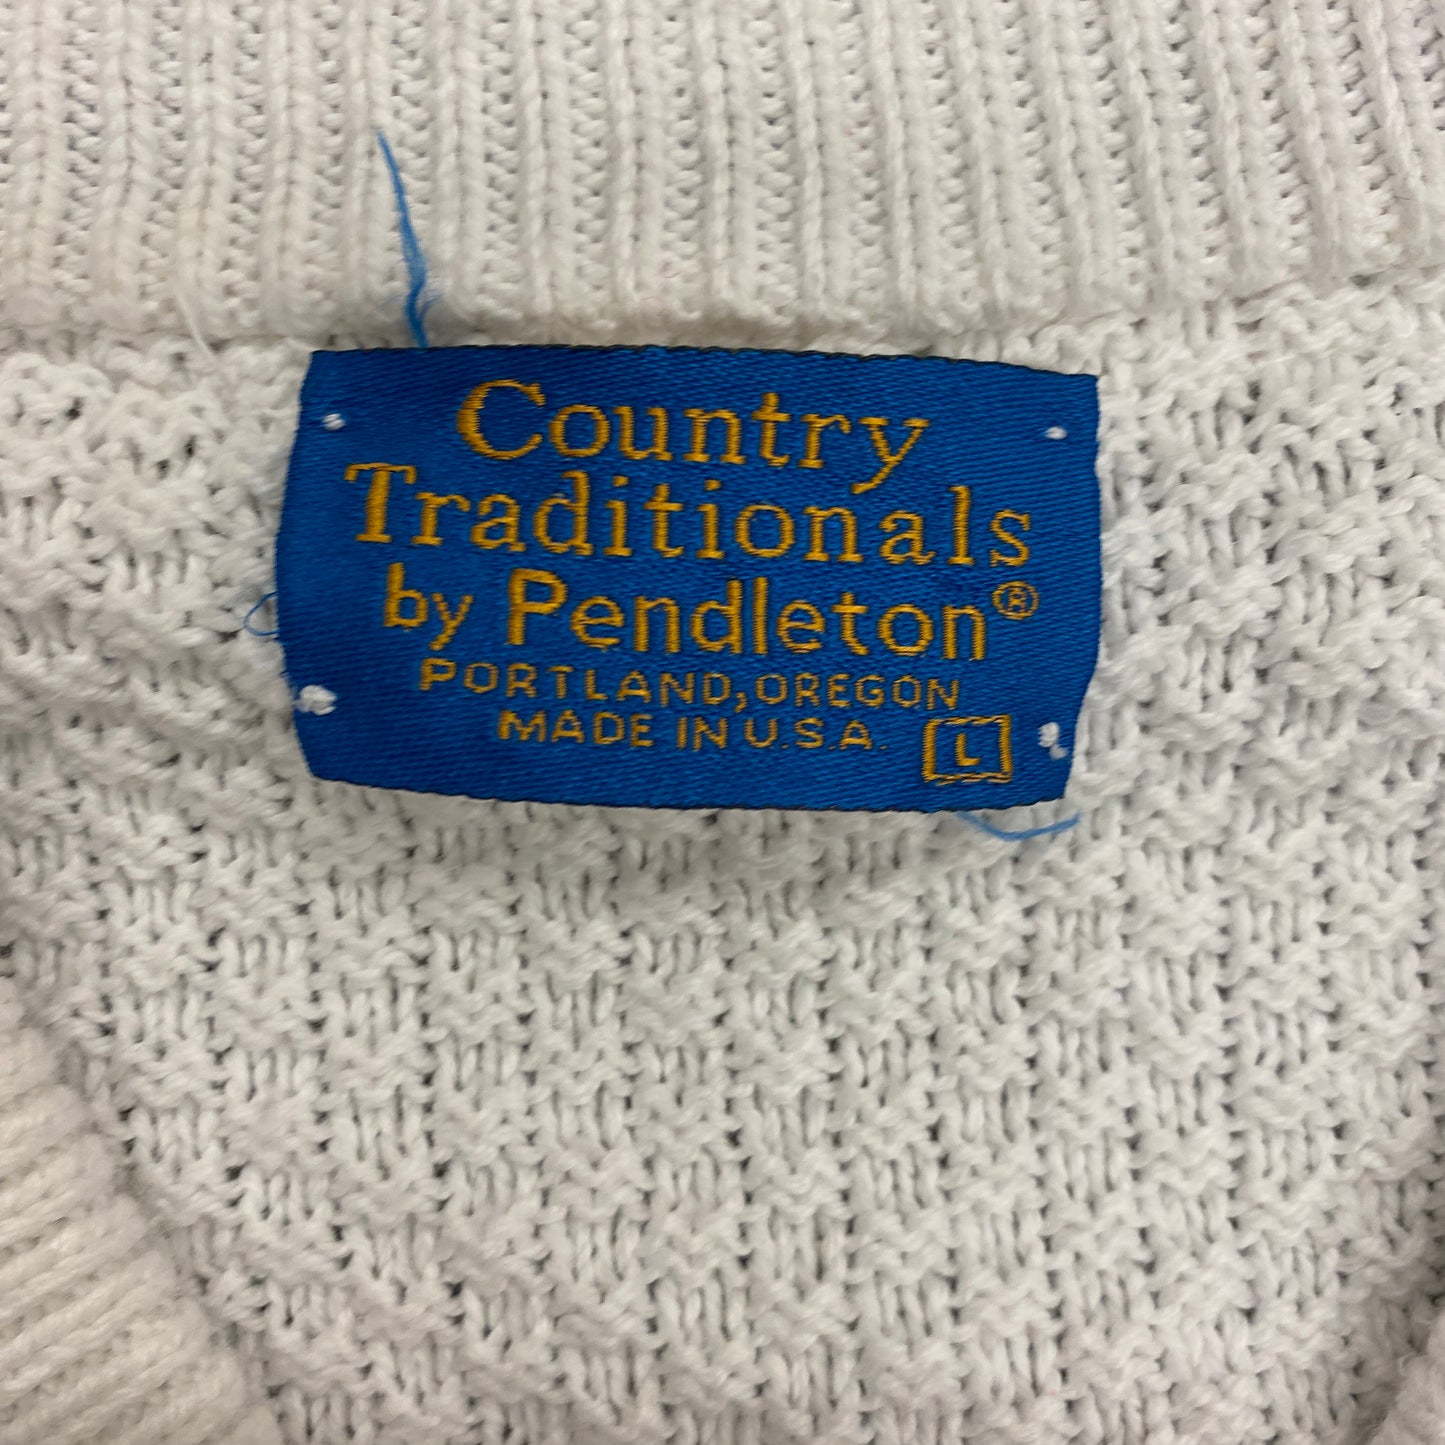 Vintage Country Traditionals by Pendleton V-Neck Sweater - Size Large